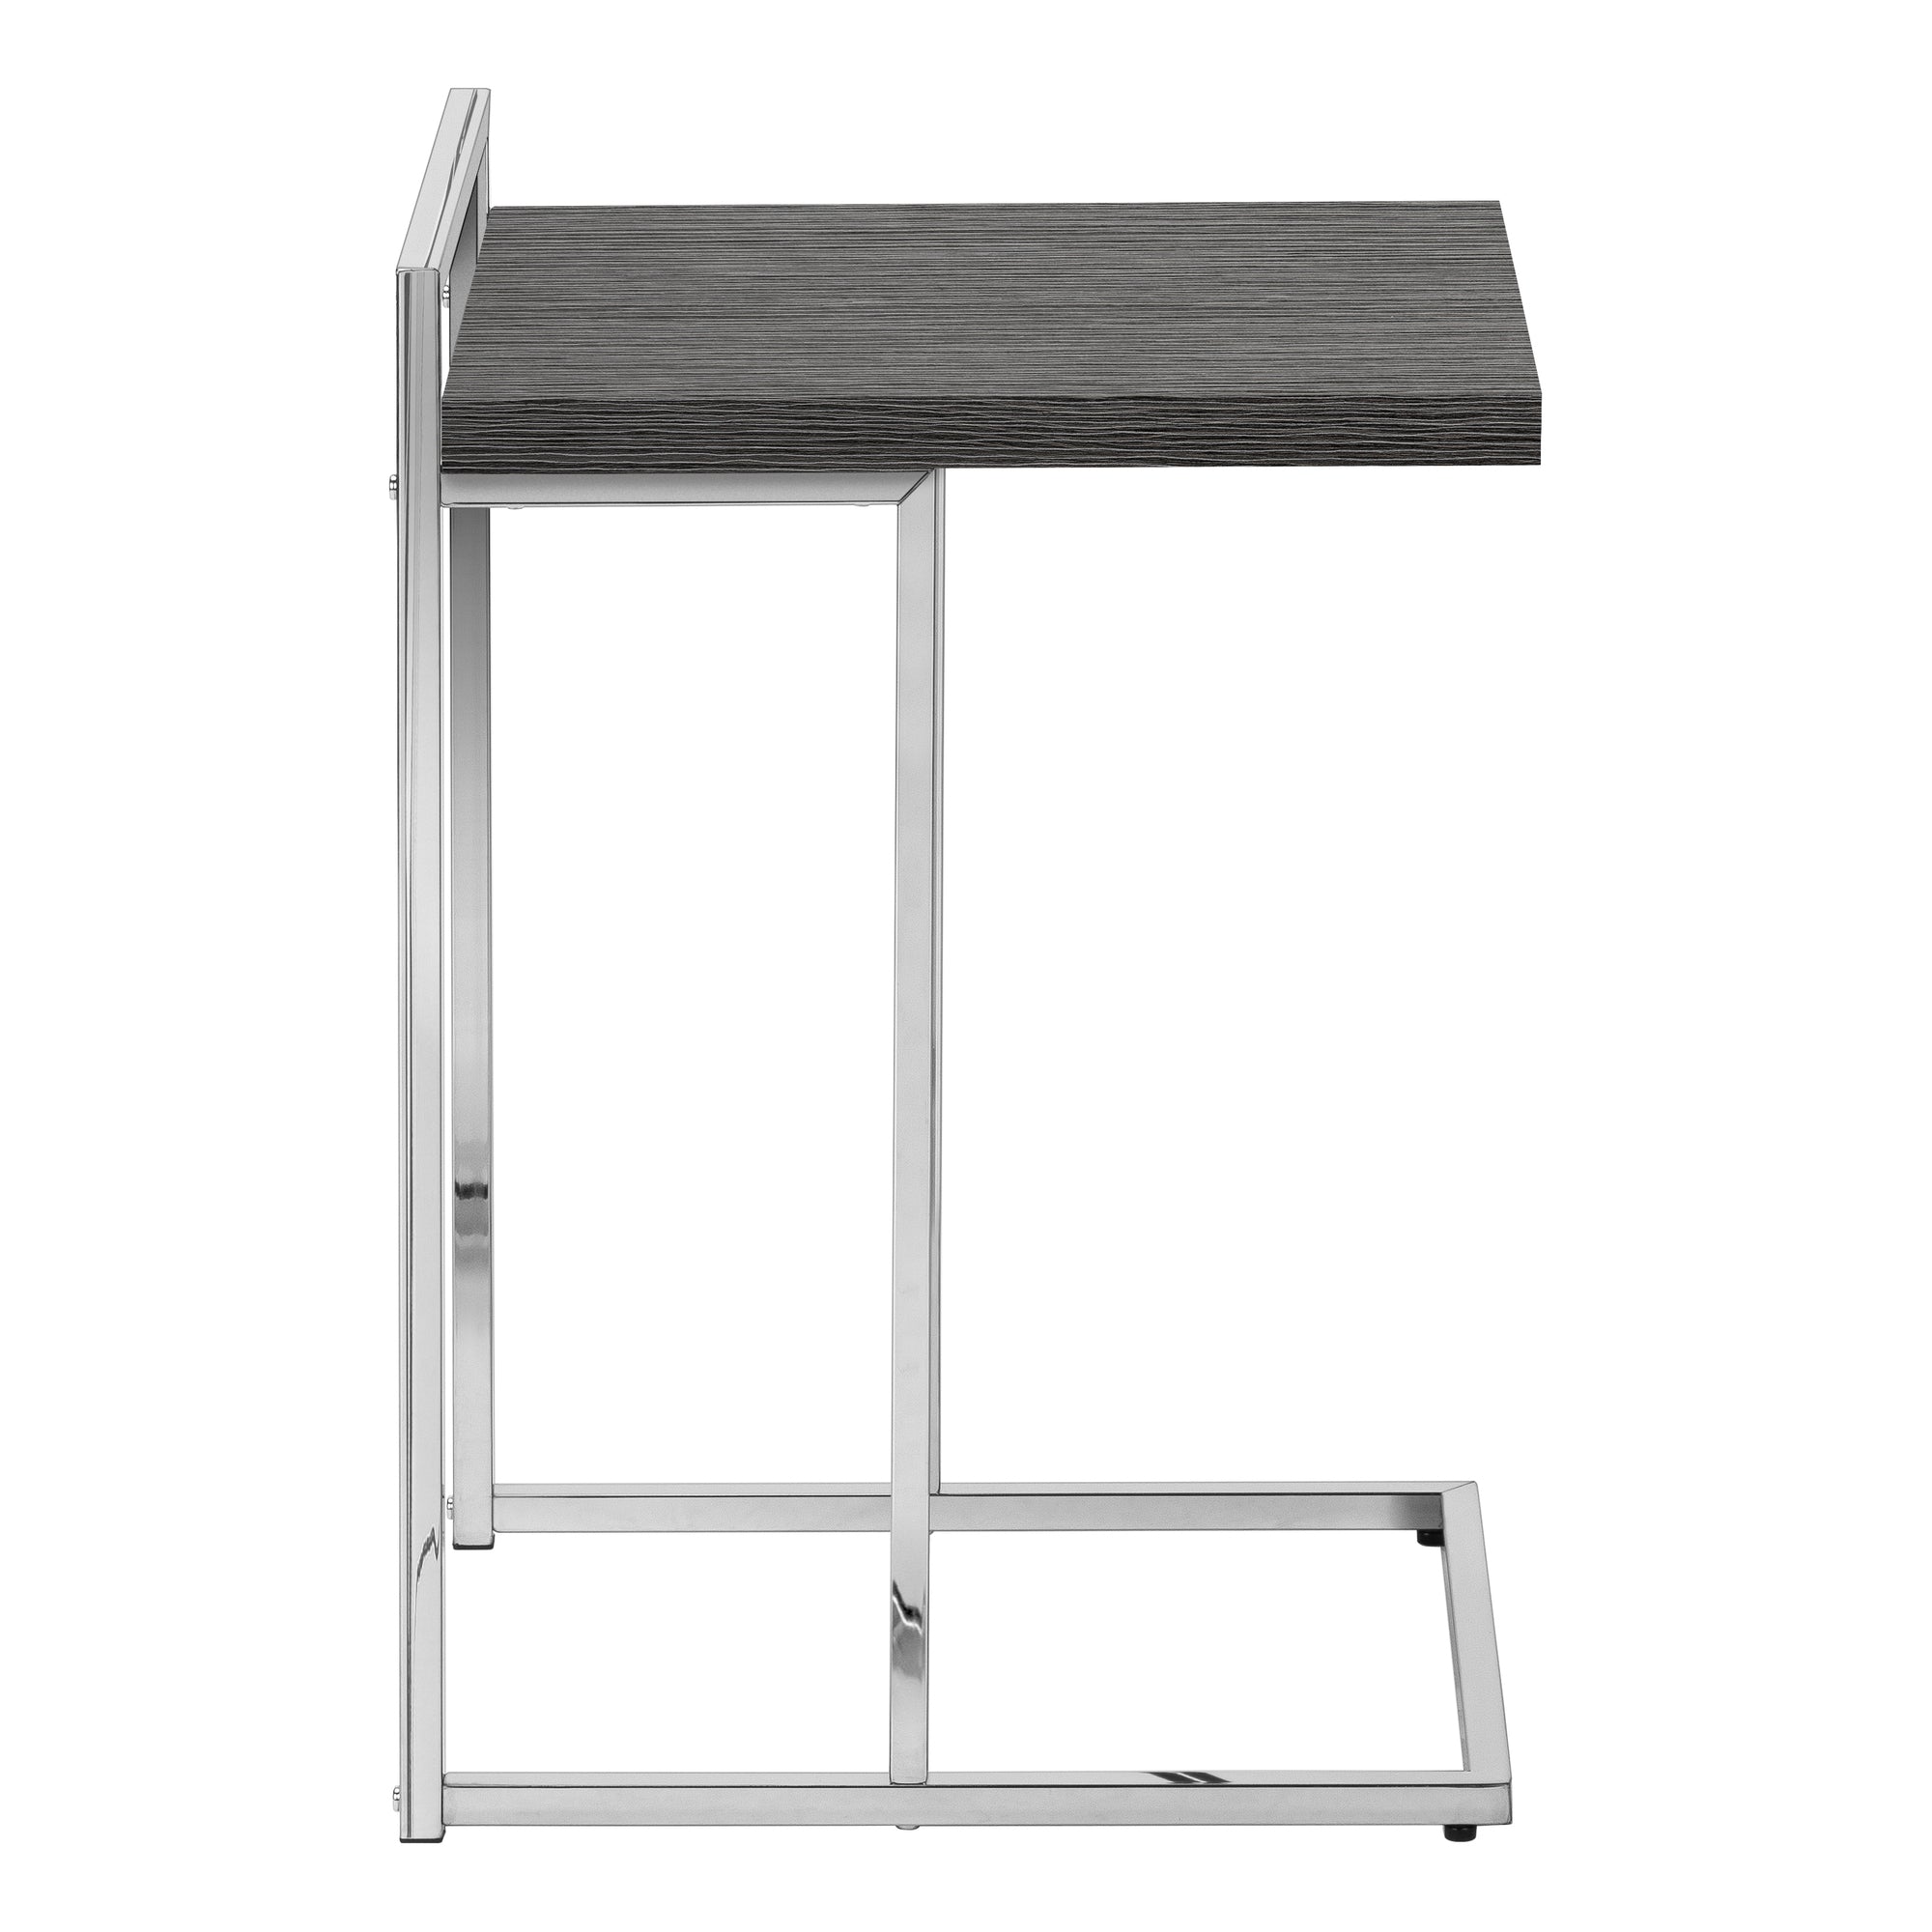 MN-863637    Accent Table, C-Shaped, End, Side, Snack, Living Room, Bedroom, Metal Frame, Laminate, Grey, Chrome, Contemporary, Modern